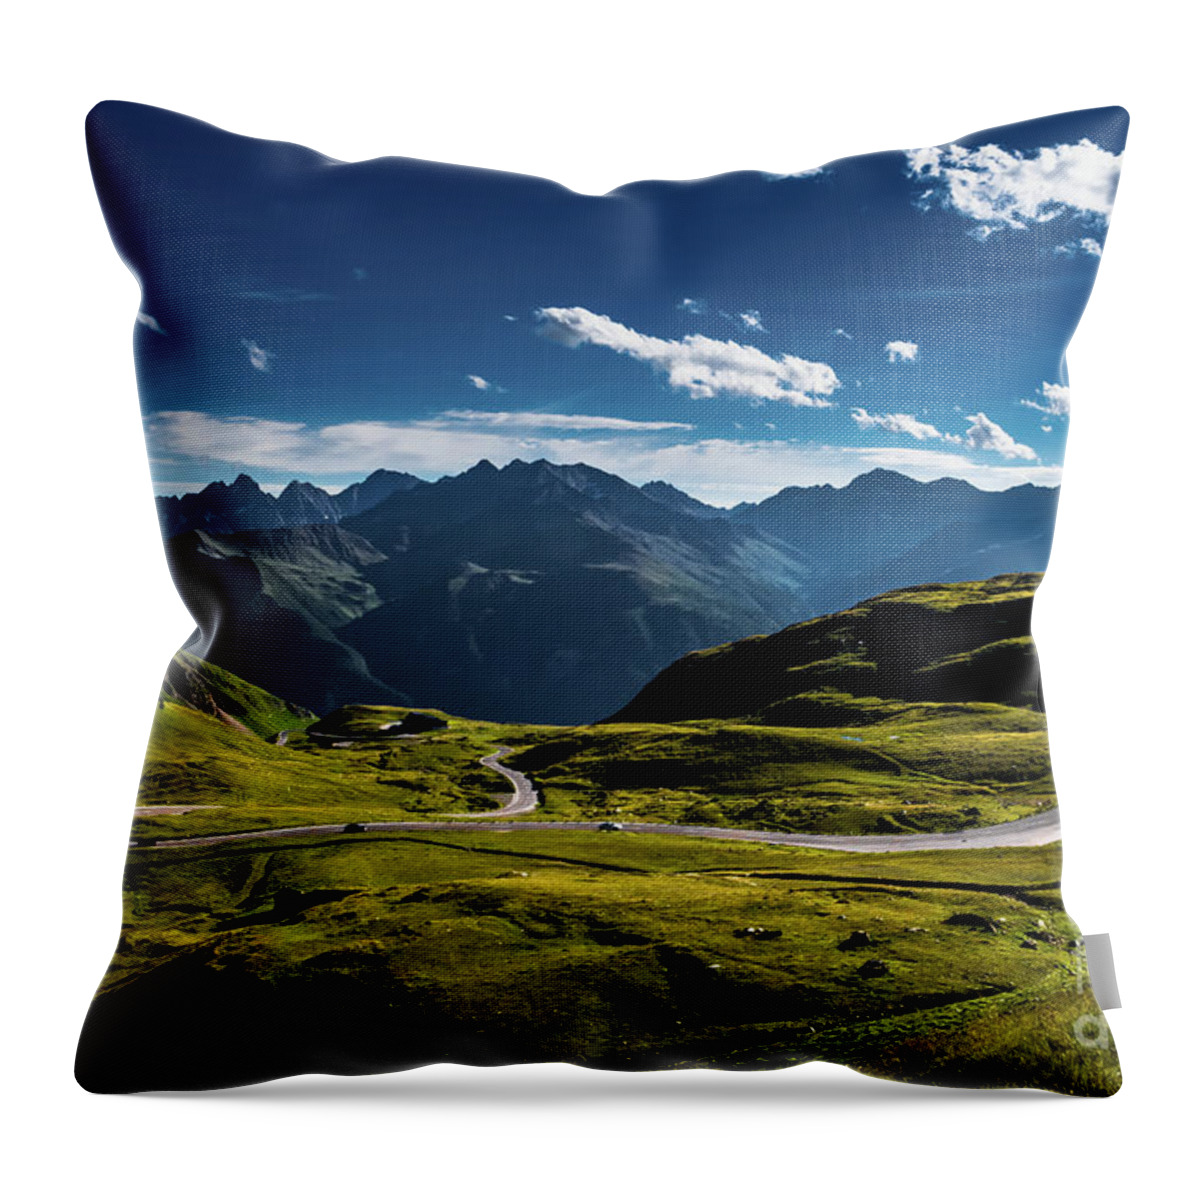 Adventure Throw Pillow featuring the photograph Mountain Pass And High Alpine Road In National Park Hohe Tauern With Mountain Peak Grossglockner by Andreas Berthold